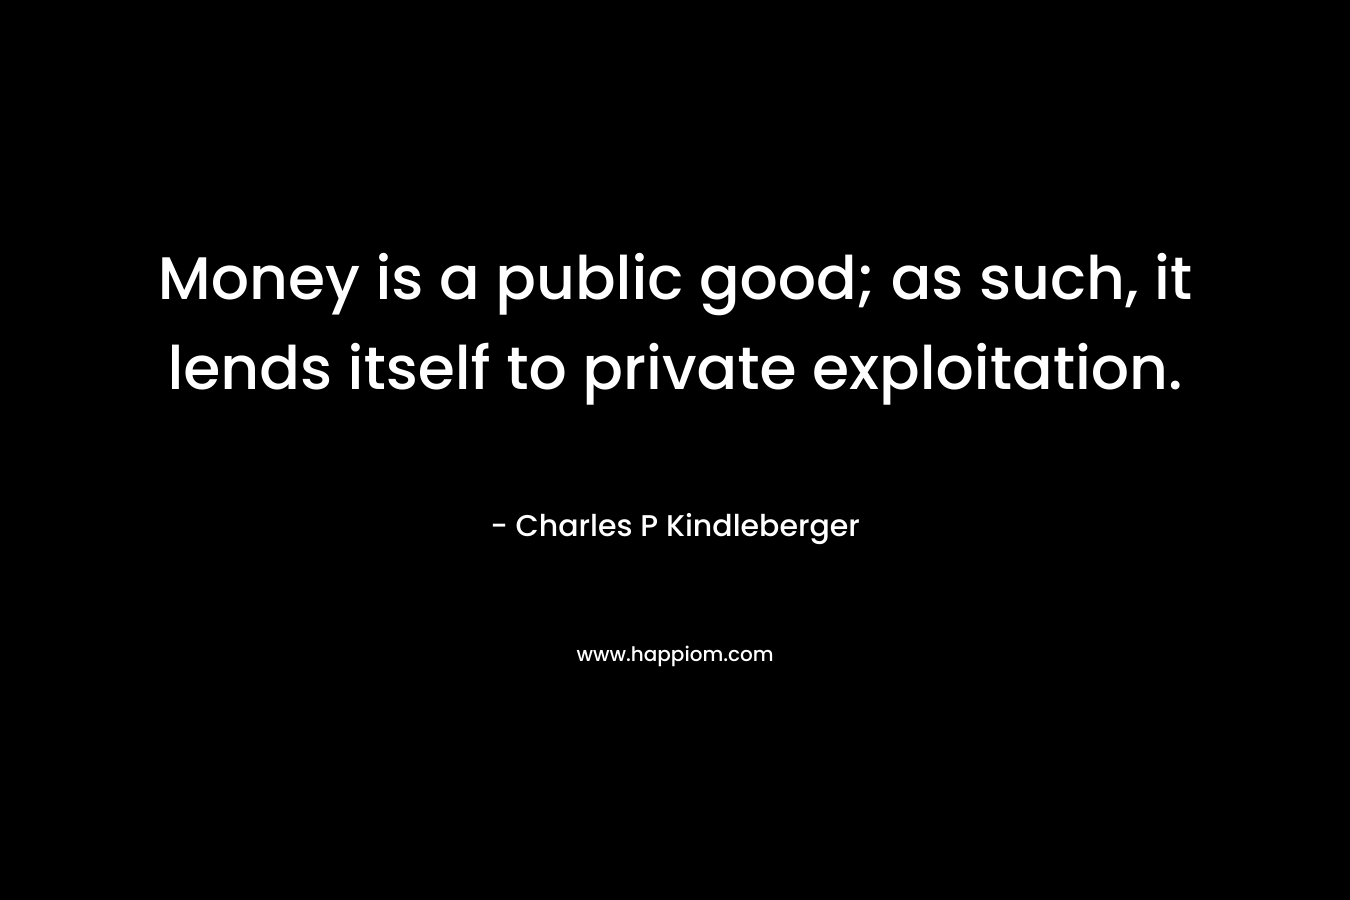 Money is a public good; as such, it lends itself to private exploitation.